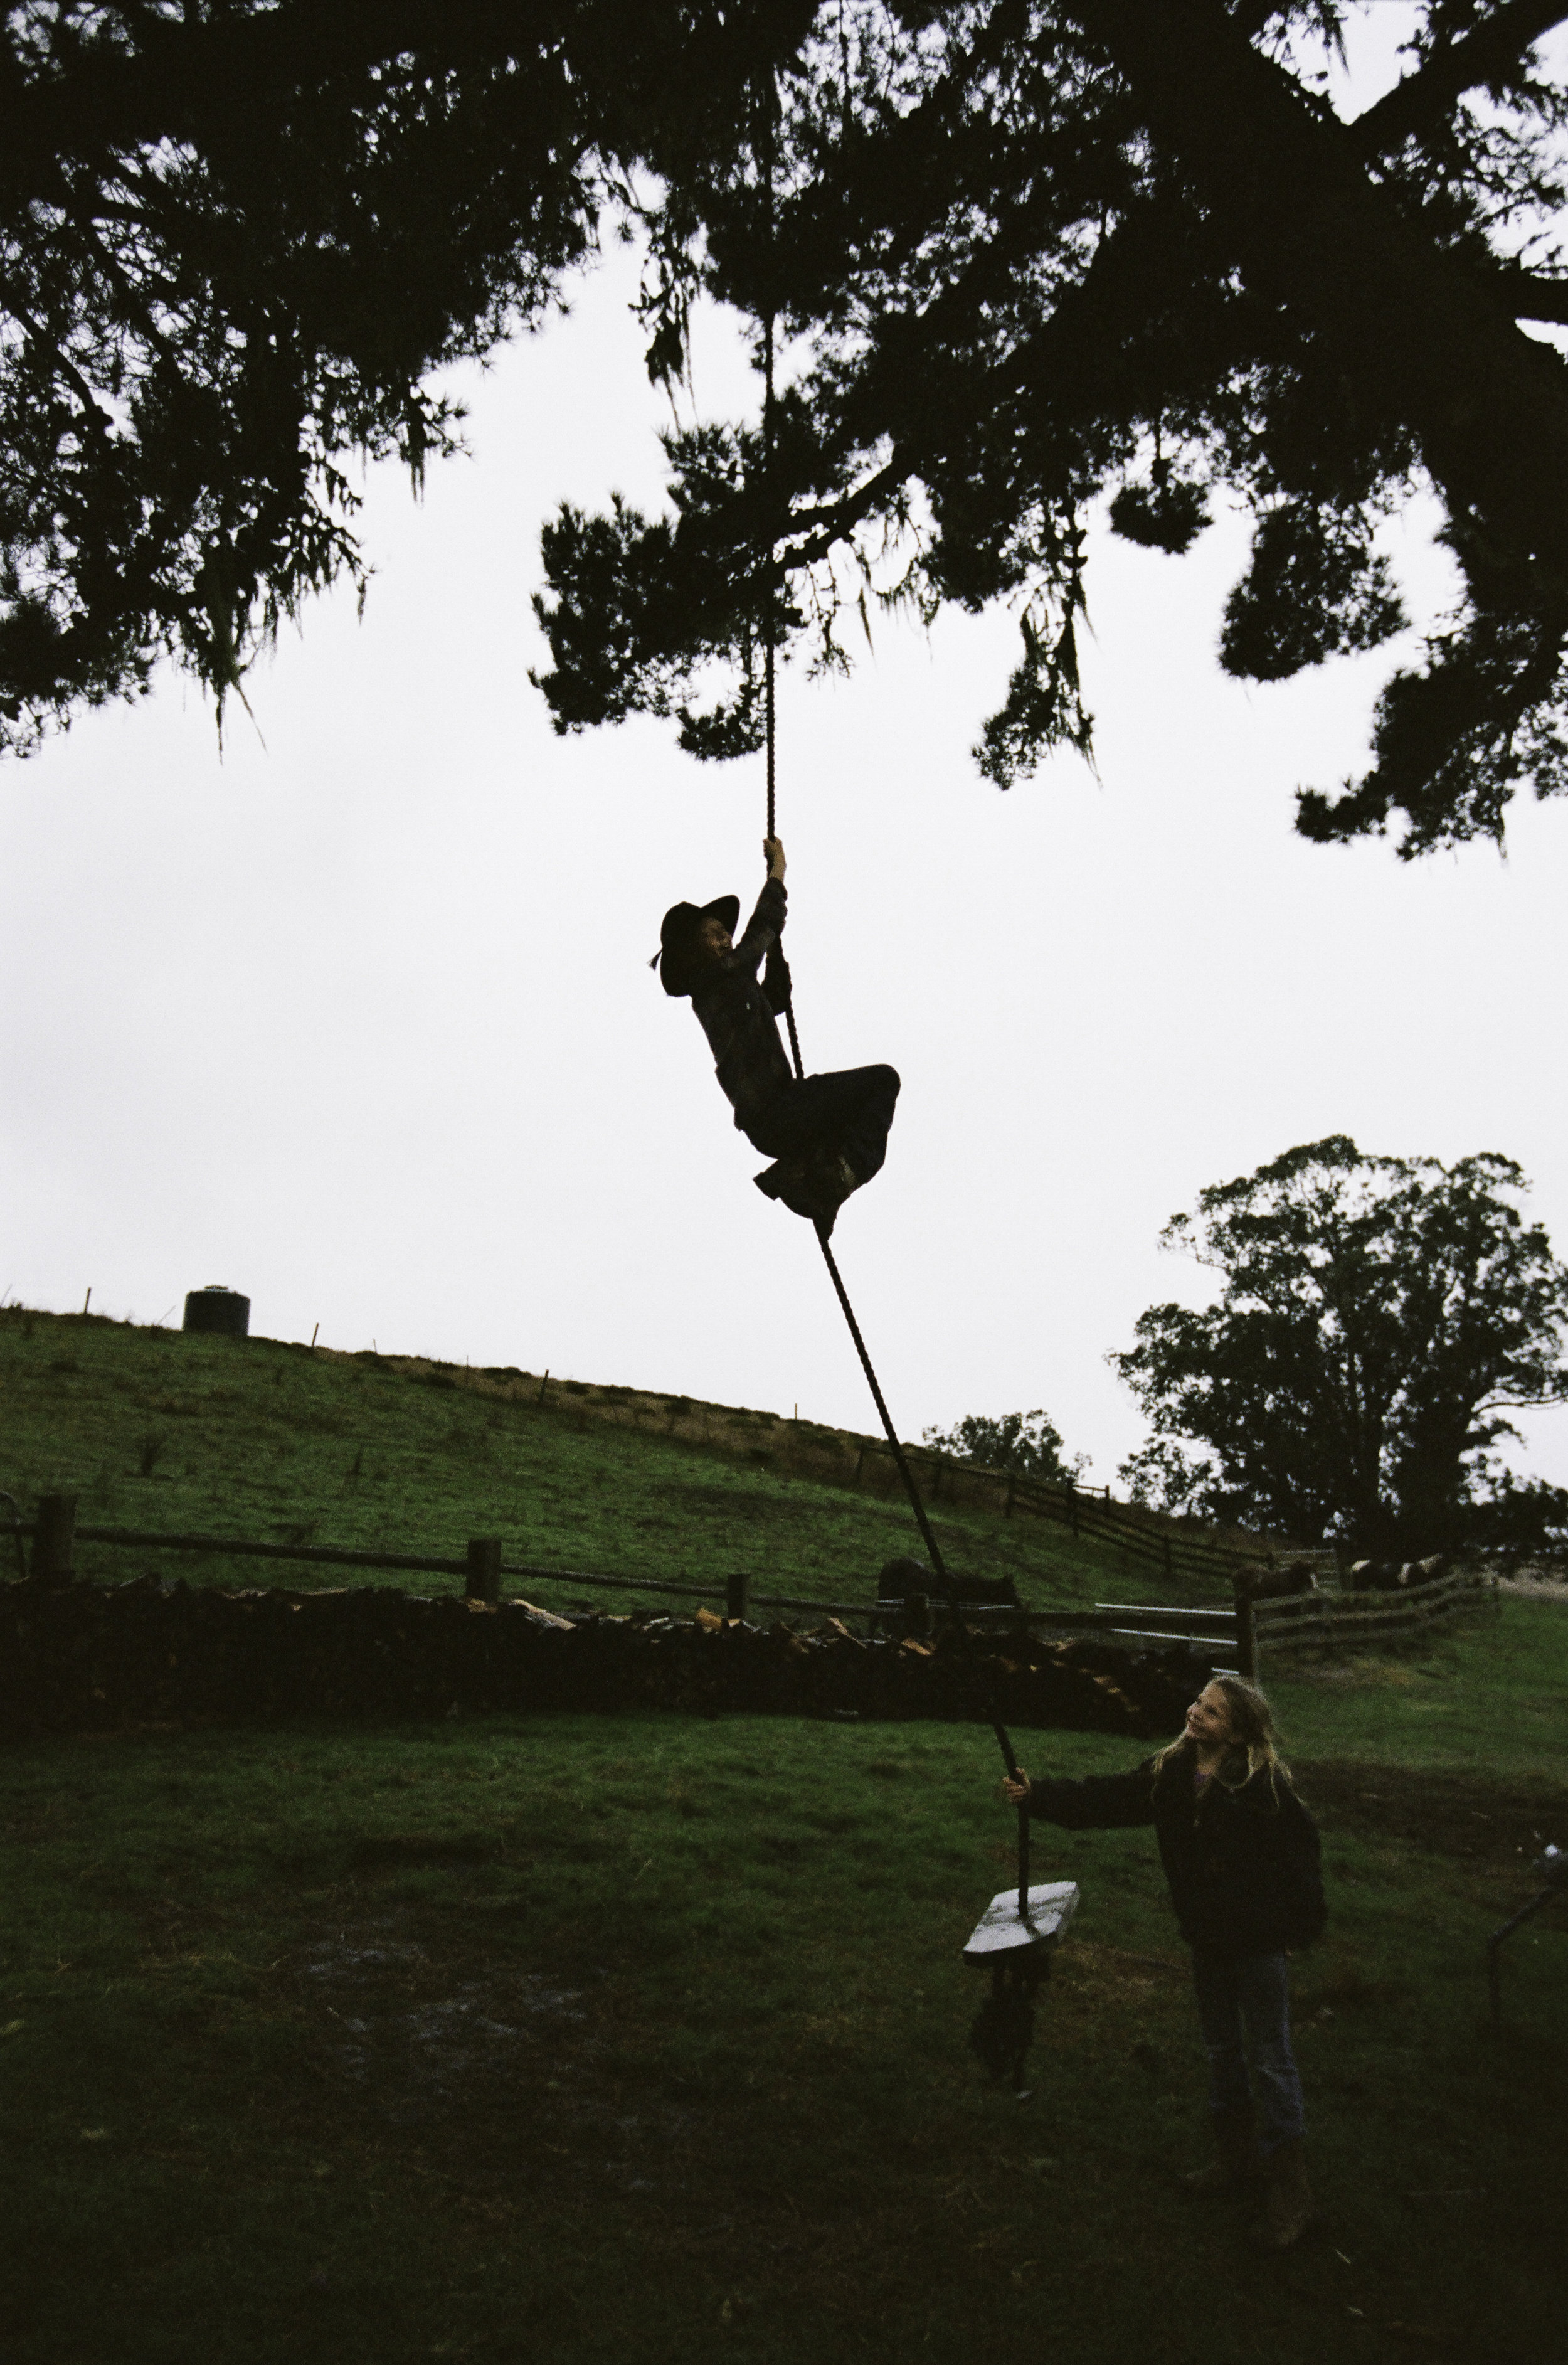  Larry, one of four kids, climbs the swing while his sister, Quill, watches. -&nbsp;San Gregorio, CA 